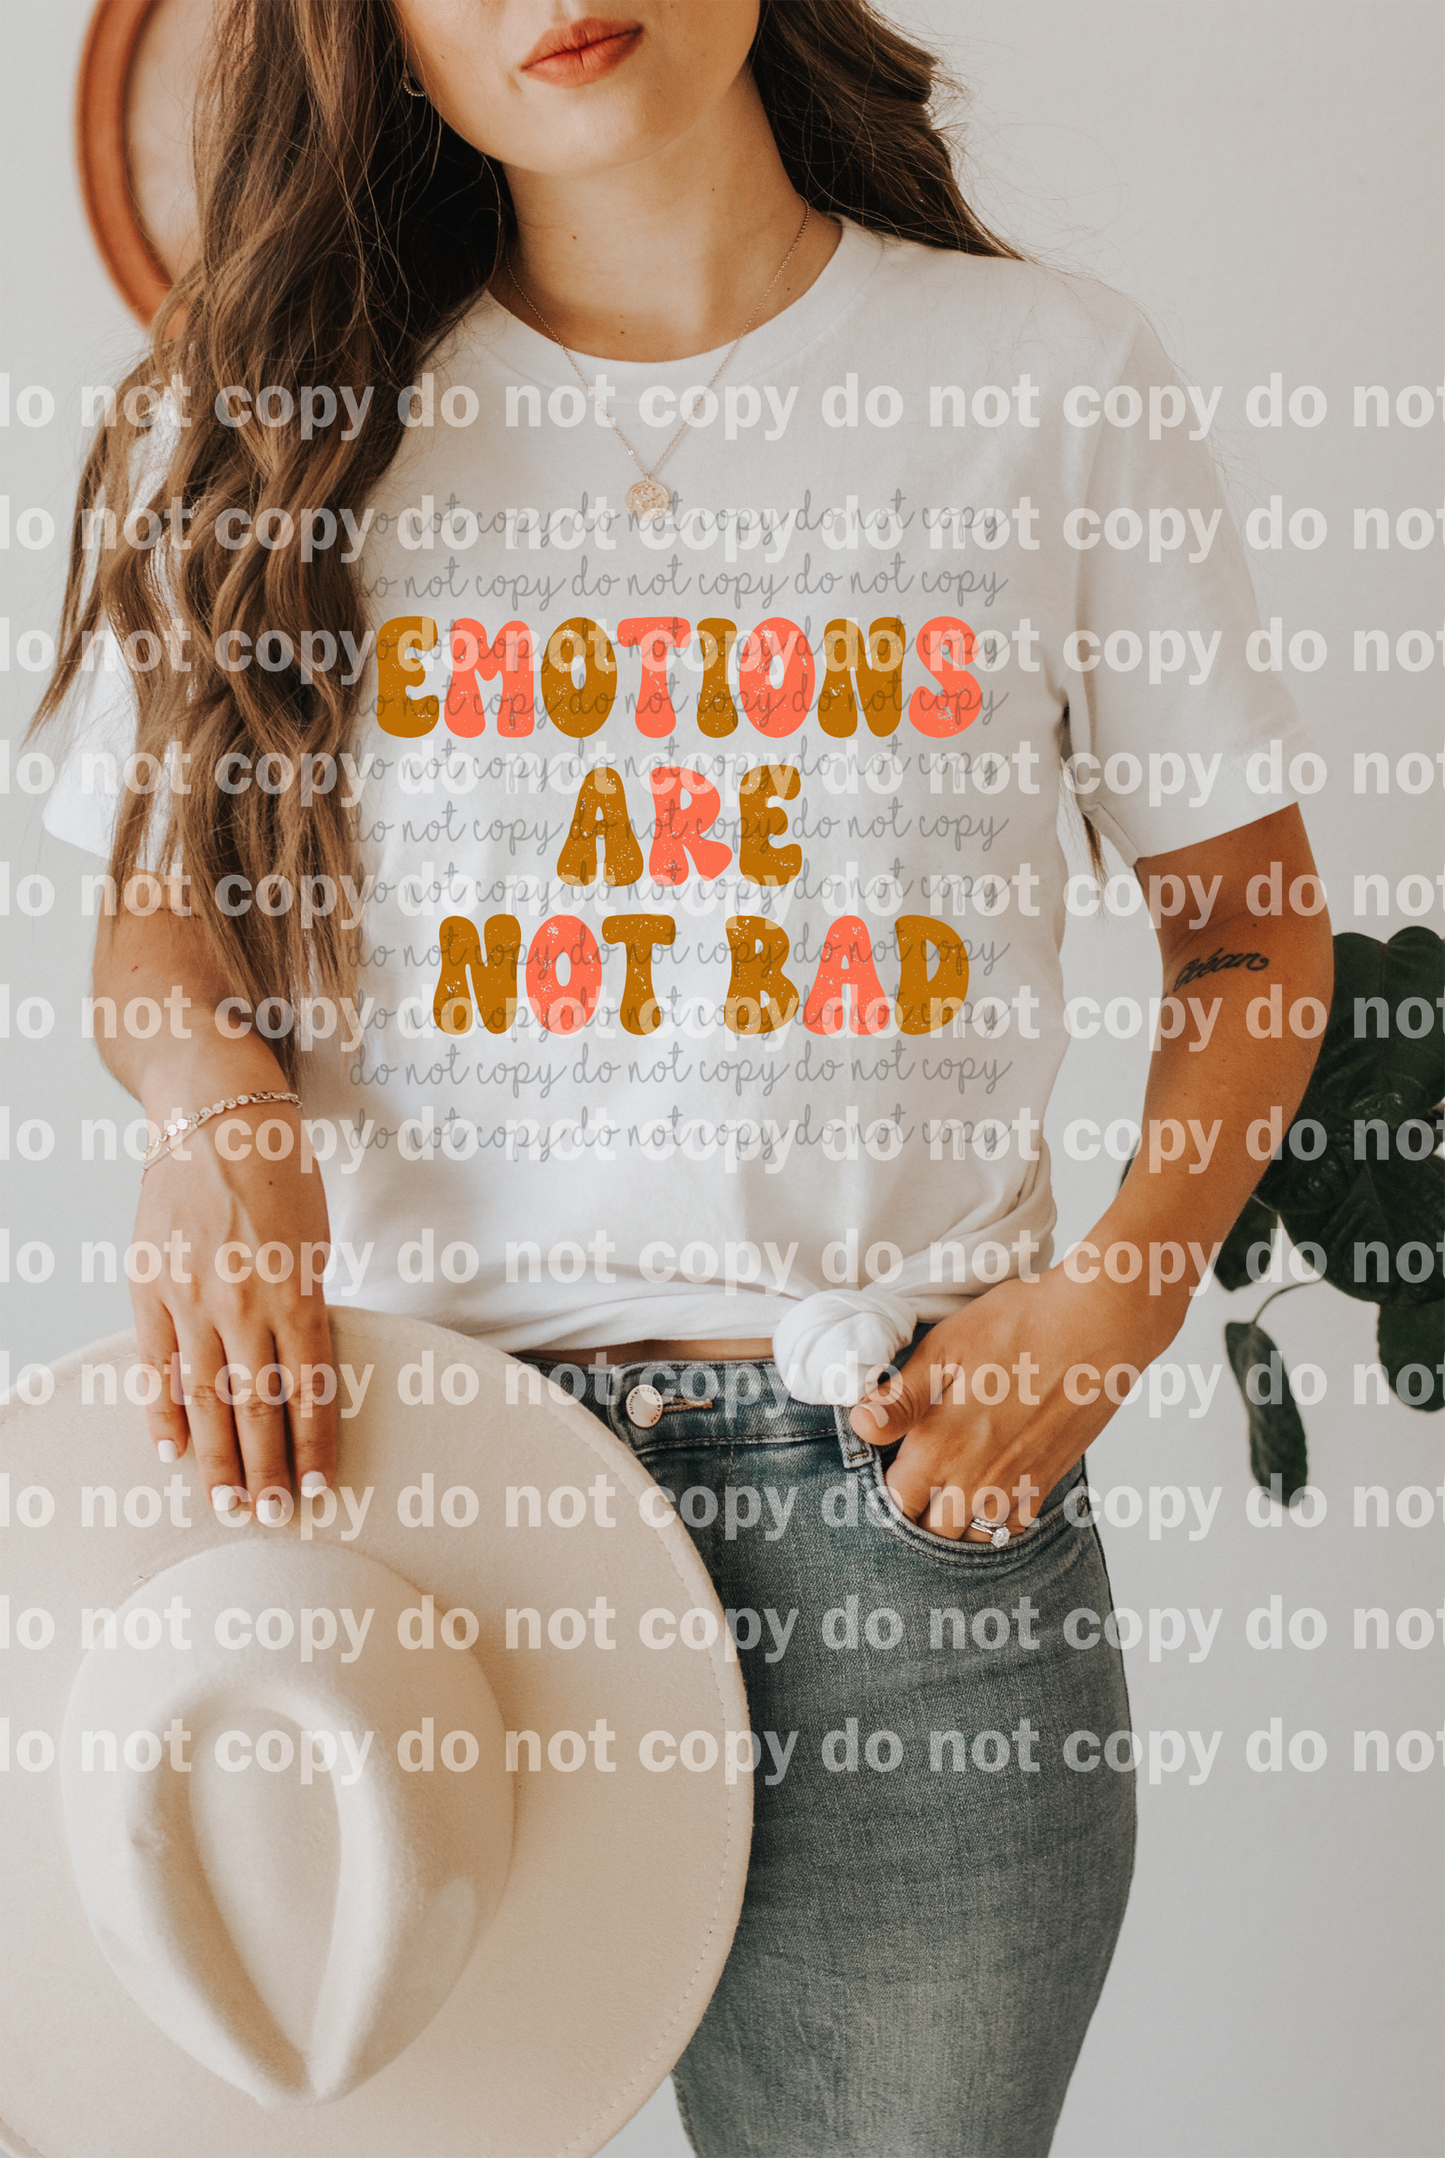 Emotions Are Not Bad Full Color/One Color Dream Print or Sublimation Print